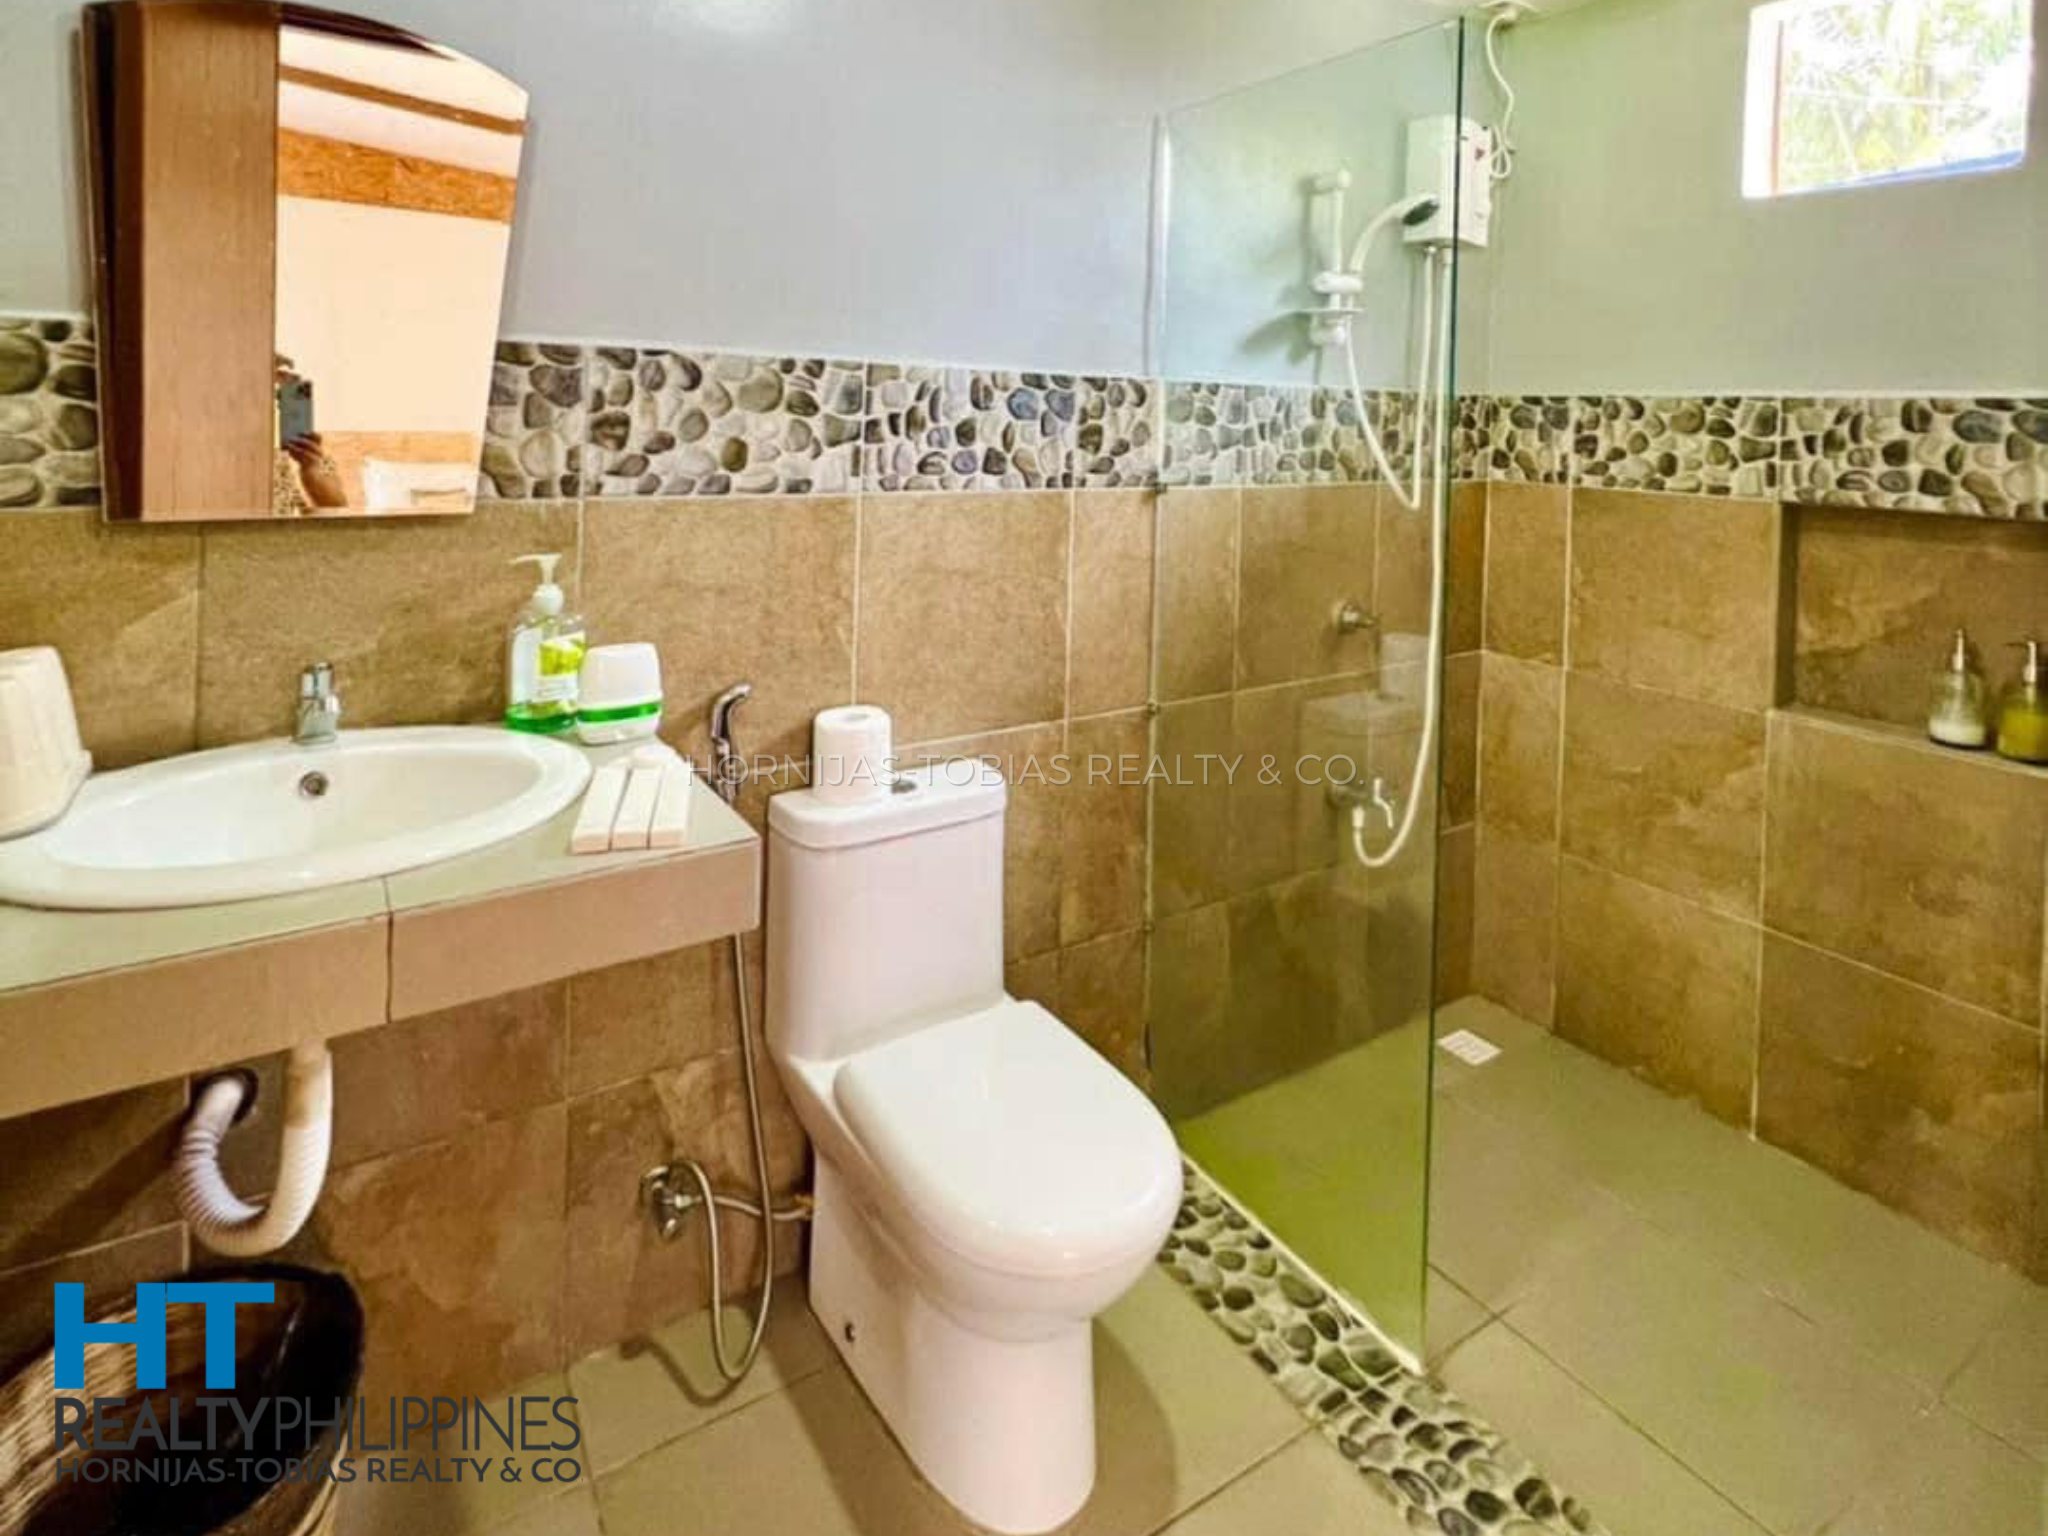 Bathroom - For Sale - Inland Resort and Rest House in Binugao, Toril, Davao City